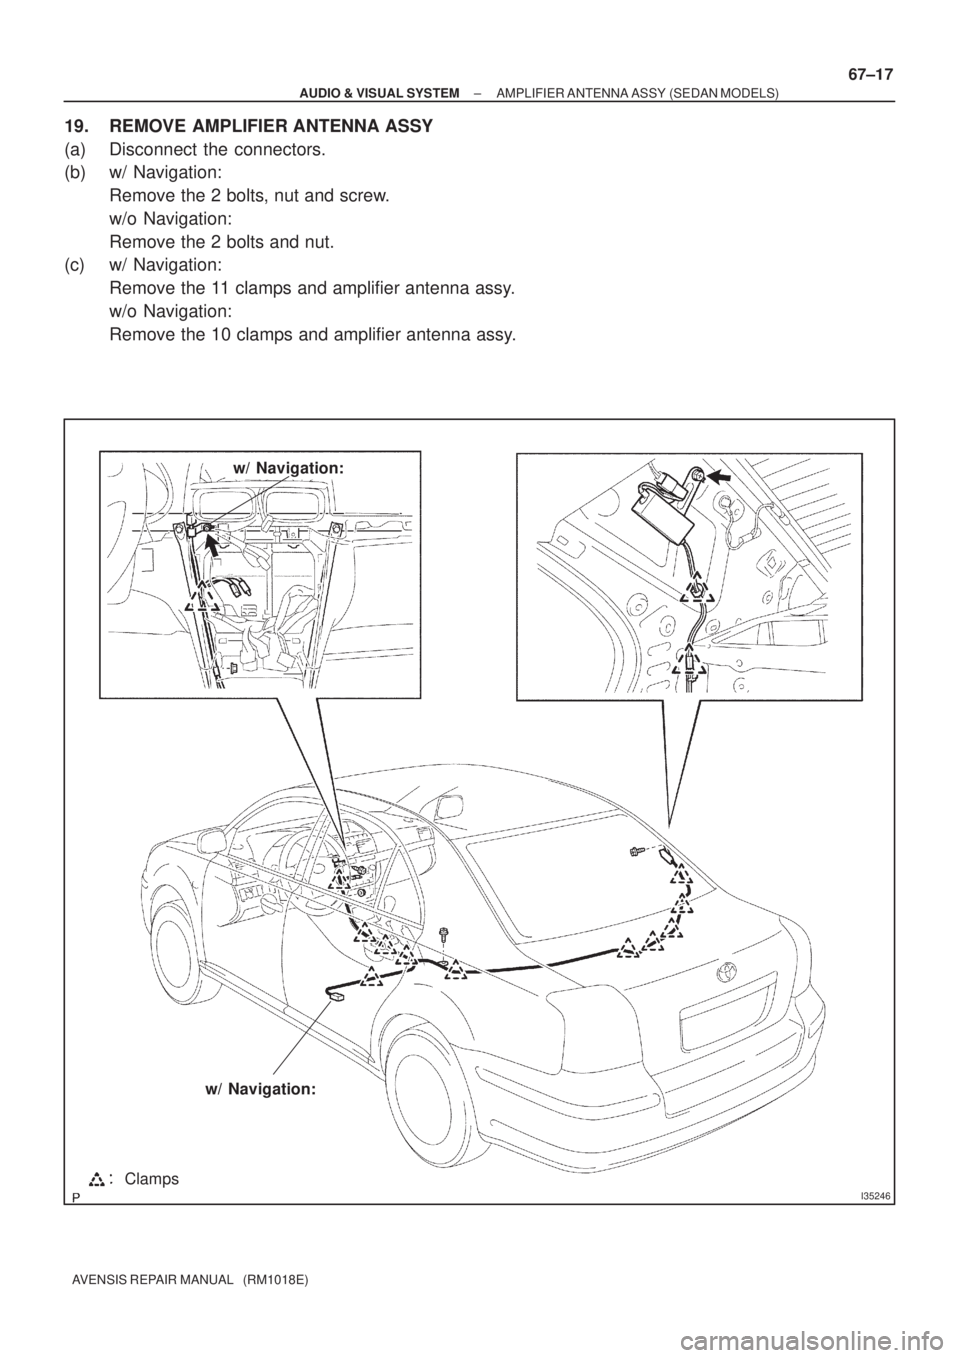 TOYOTA AVENSIS 2002  Repair Manual I35246Clamps
w/ Navigation:
w/ Navigation:
± AUDIO & VISUAL SYSTEMAMPLIFIER ANTENNA ASSY (SEDAN MODELS)
67±17
AVENSIS REPAIR MANUAL   (RM1018E)
19. REMOVE AMPLIFIER ANTENNA ASSY
(a) Disconnect the c